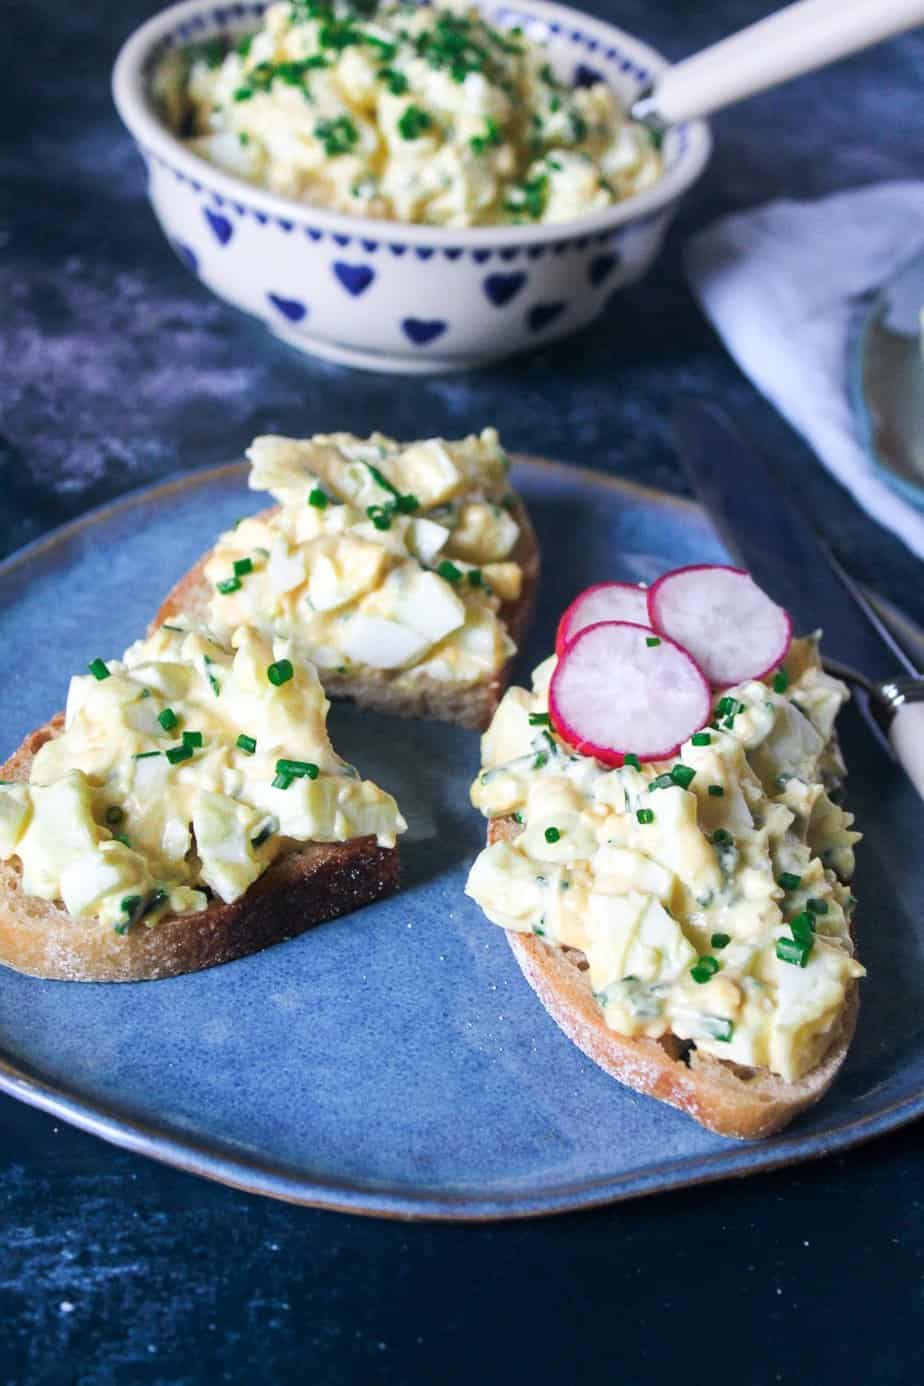 The BEST Egg Mayonnaise Ever